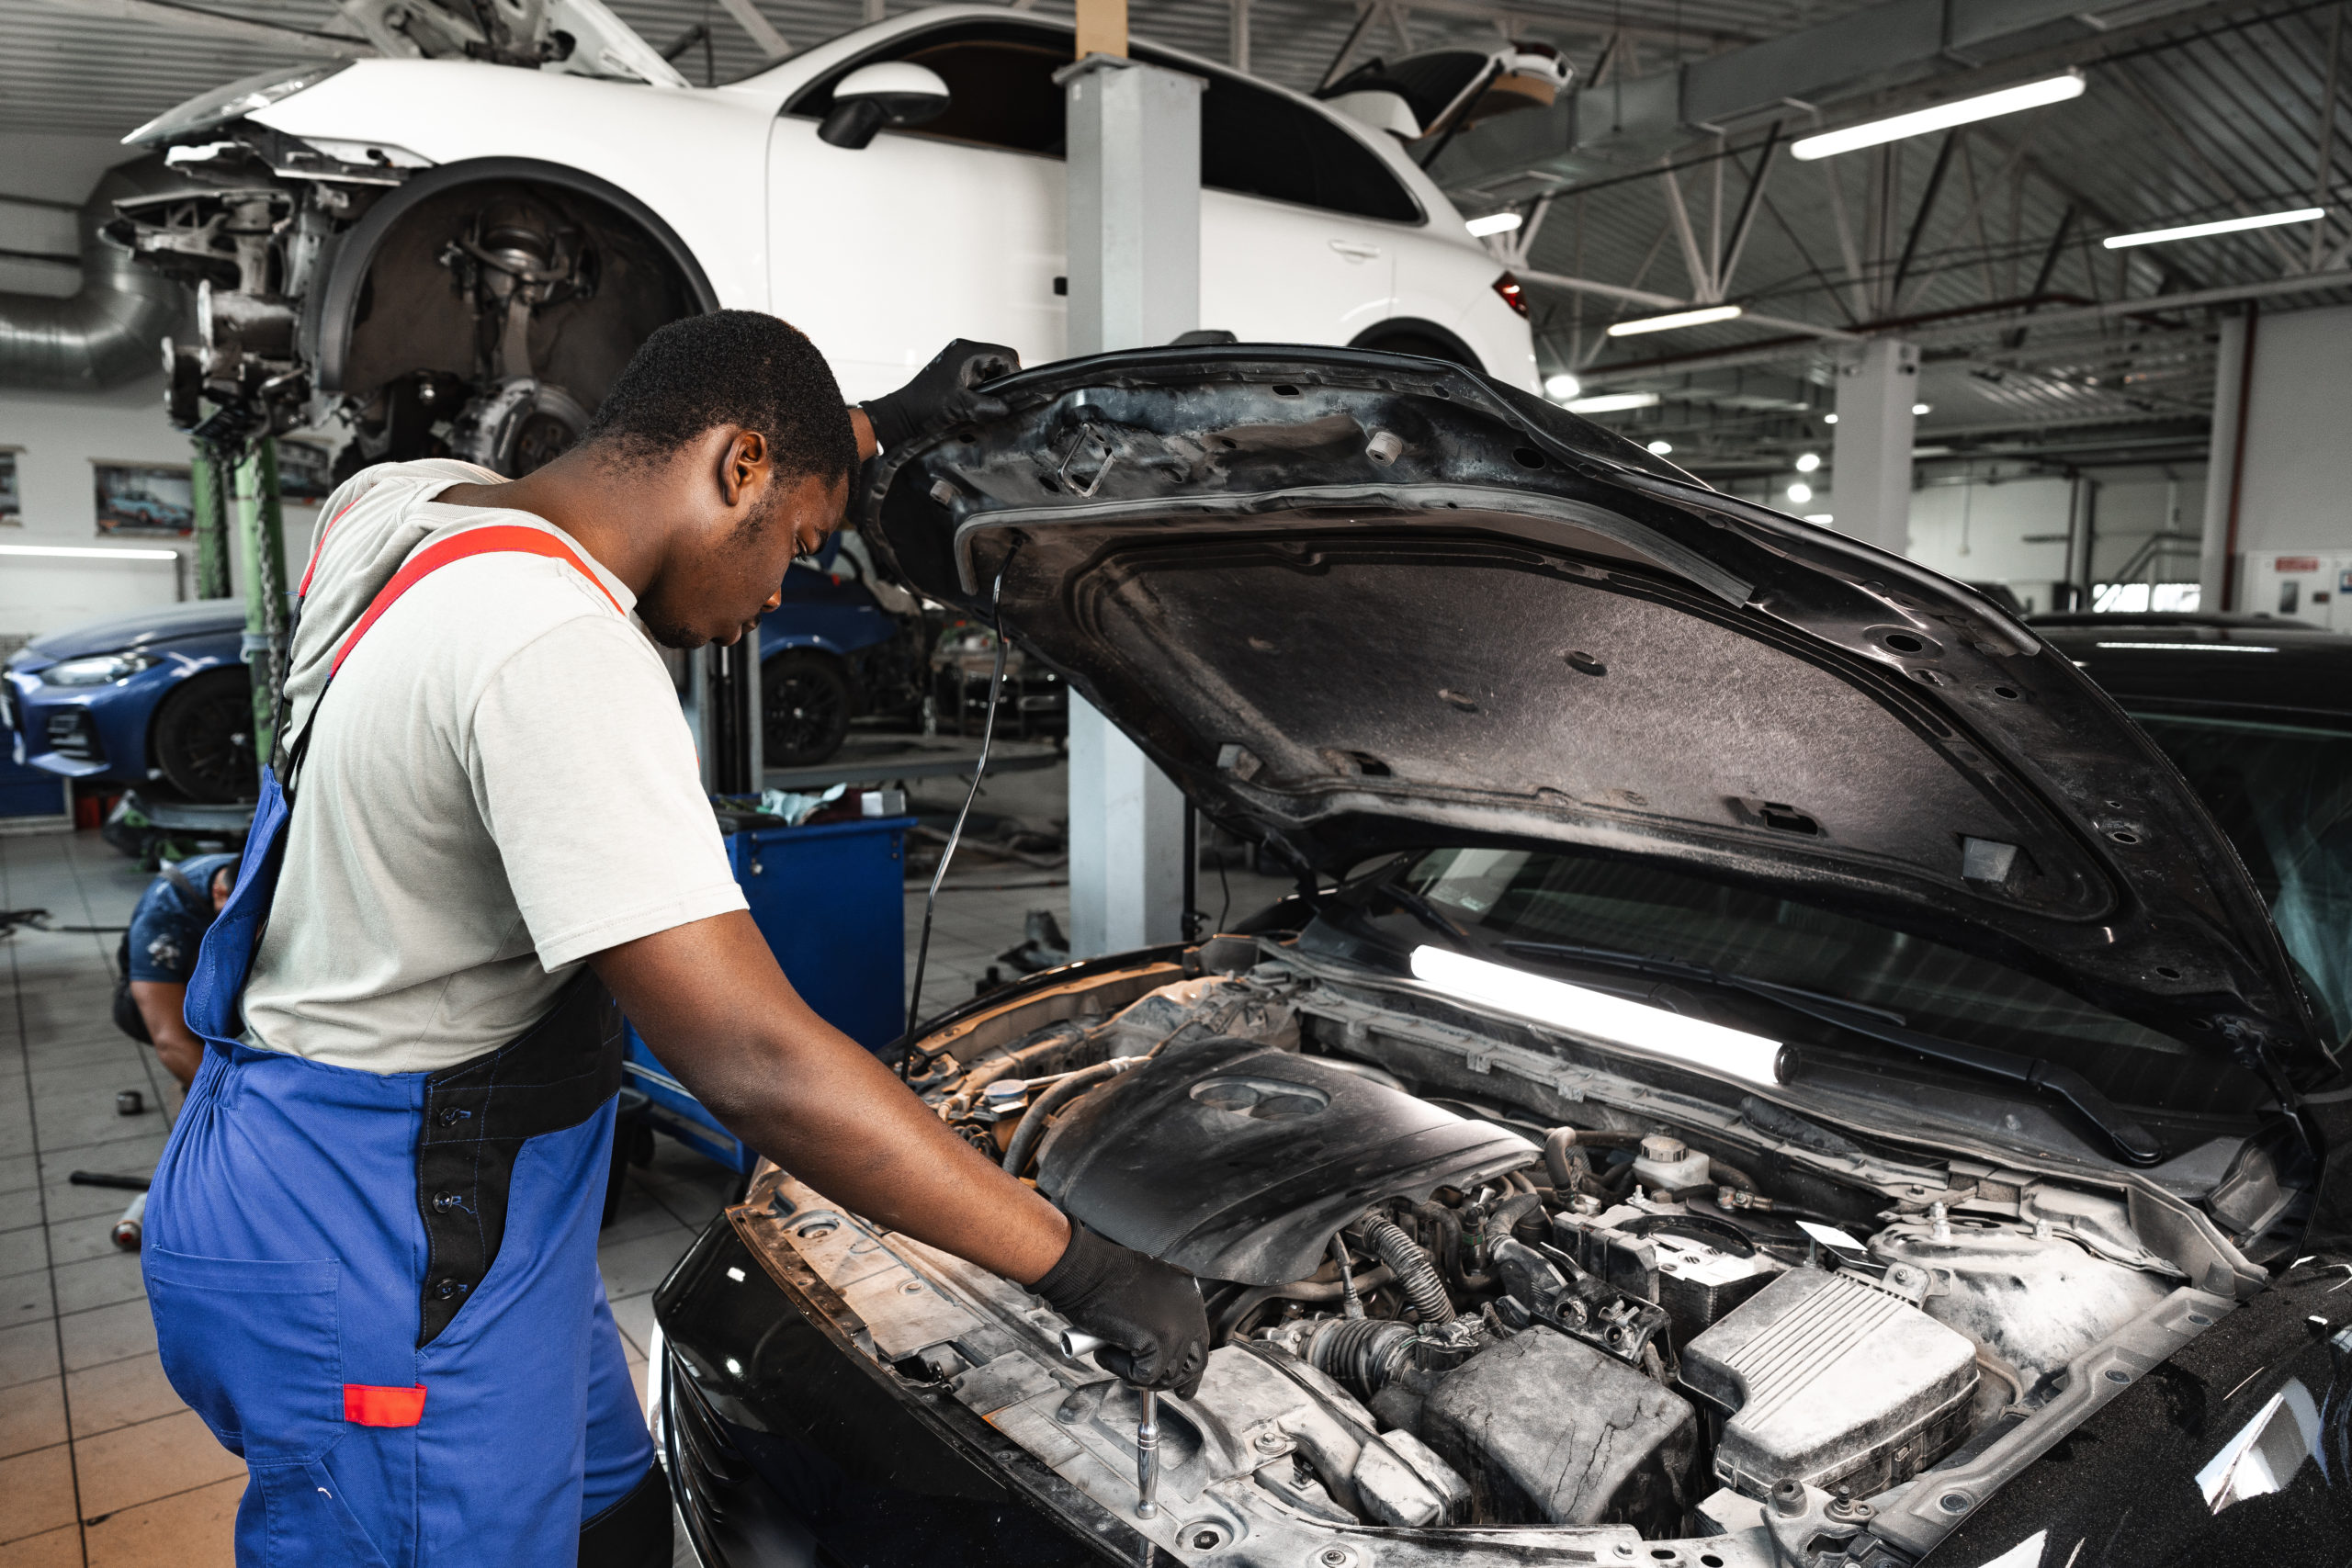 https://autolab.com.co/wp-content/uploads/young-african-male-mechanic-repairs-car-in-garage-2023-12-20-19-03-46-utc-scaled.jpg